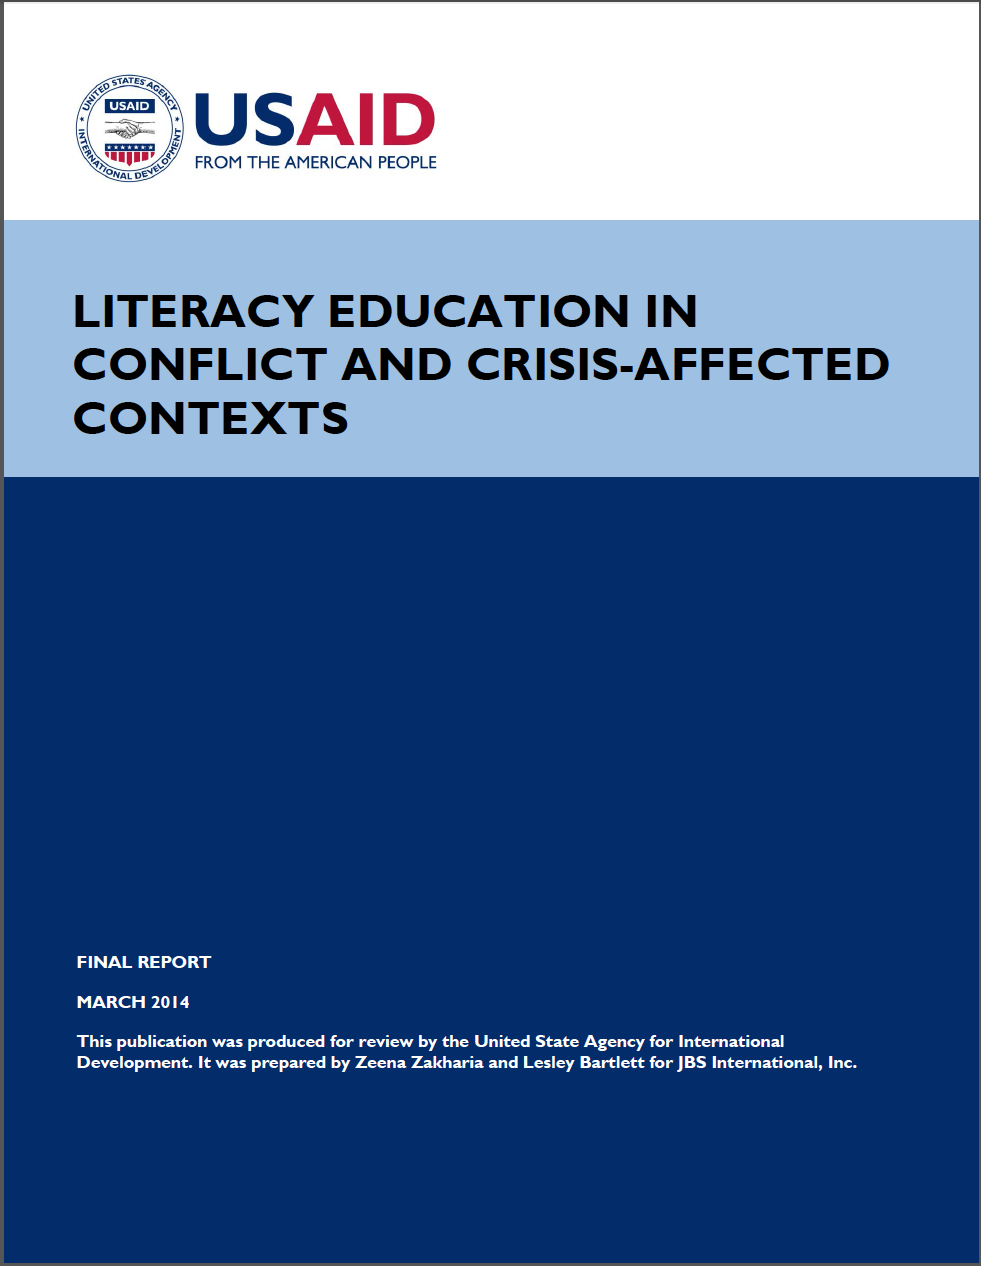 Literacy Education Crisis & Conflict